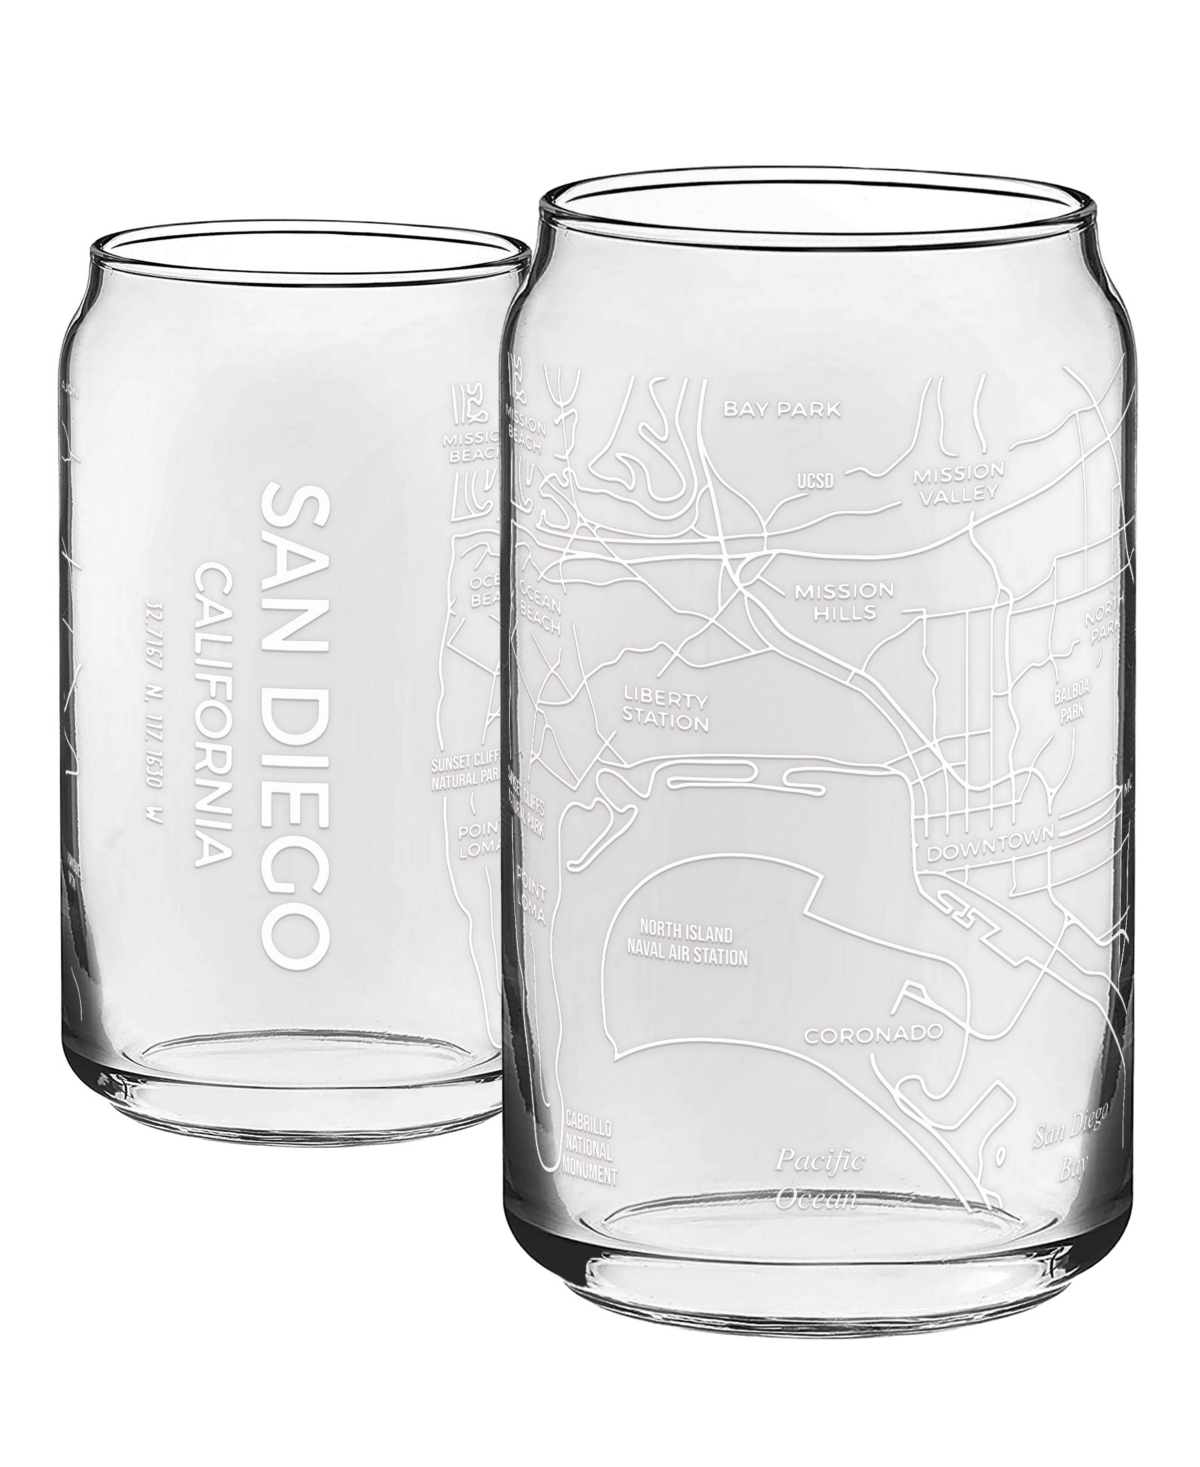 Narbo The Can San Diego Map 16 oz Everyday Glassware, Set Of 2 In White